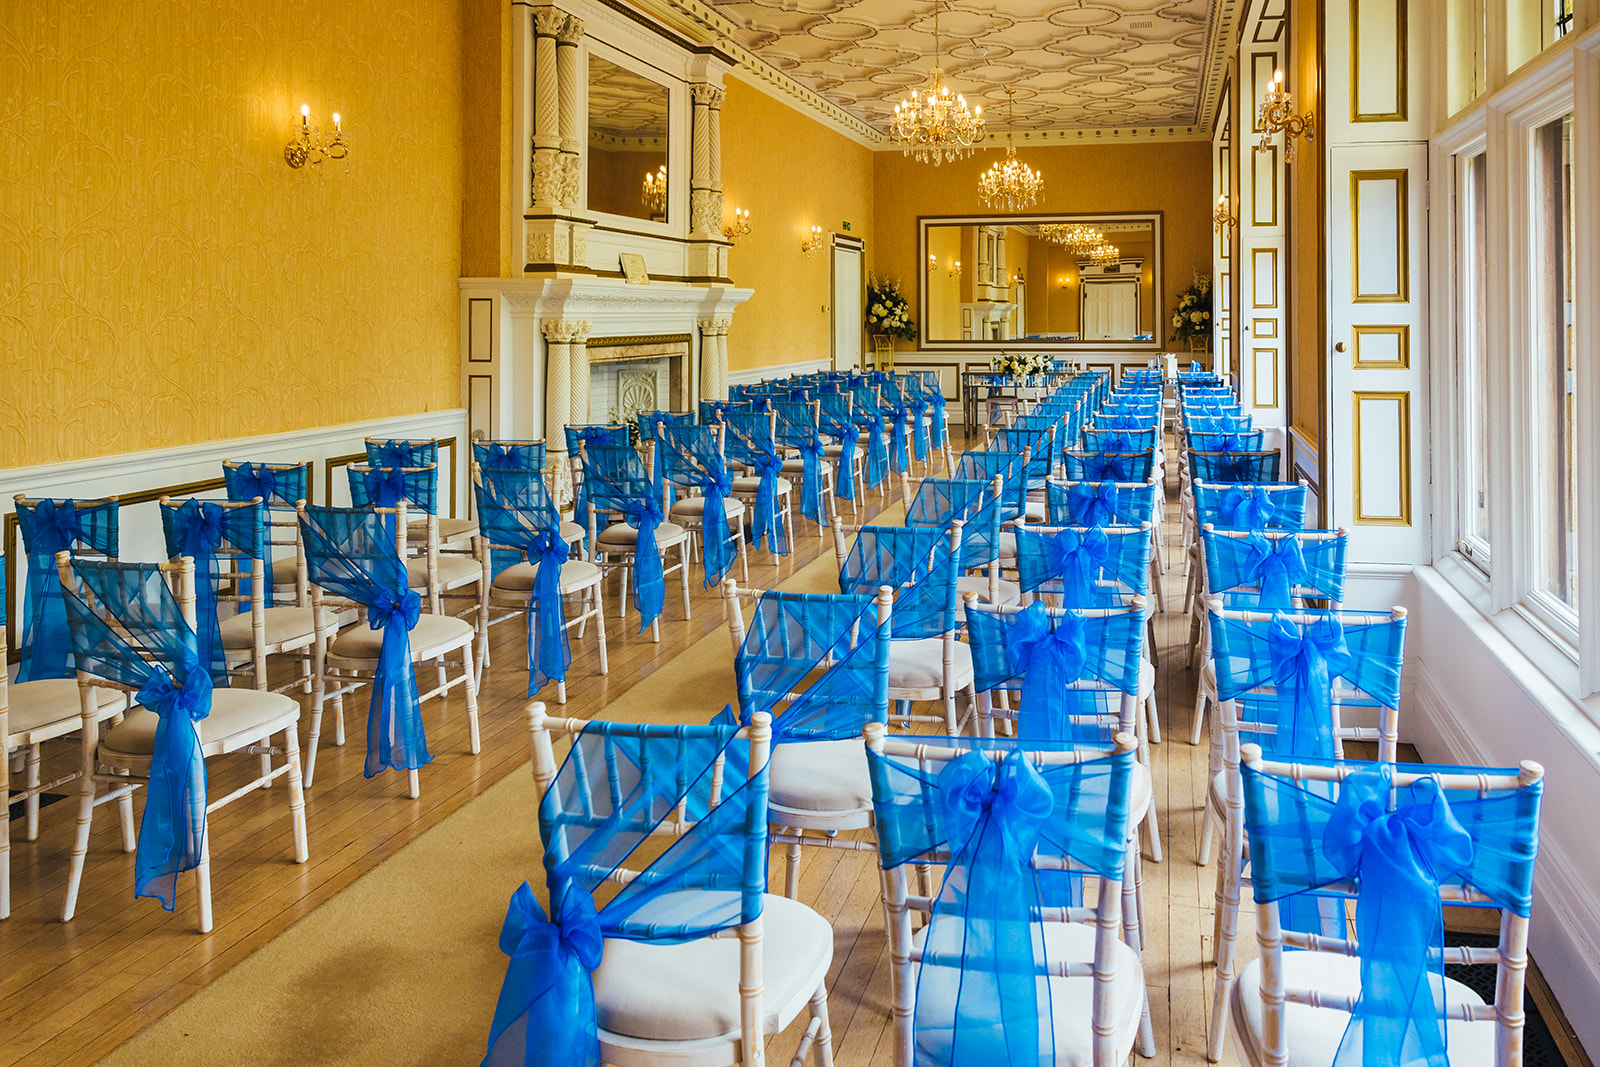 Photo by Kirsty Rockett Photography, of Holmewood Hall's beautiful main ceremony room decked out with the blue sashes we requested.